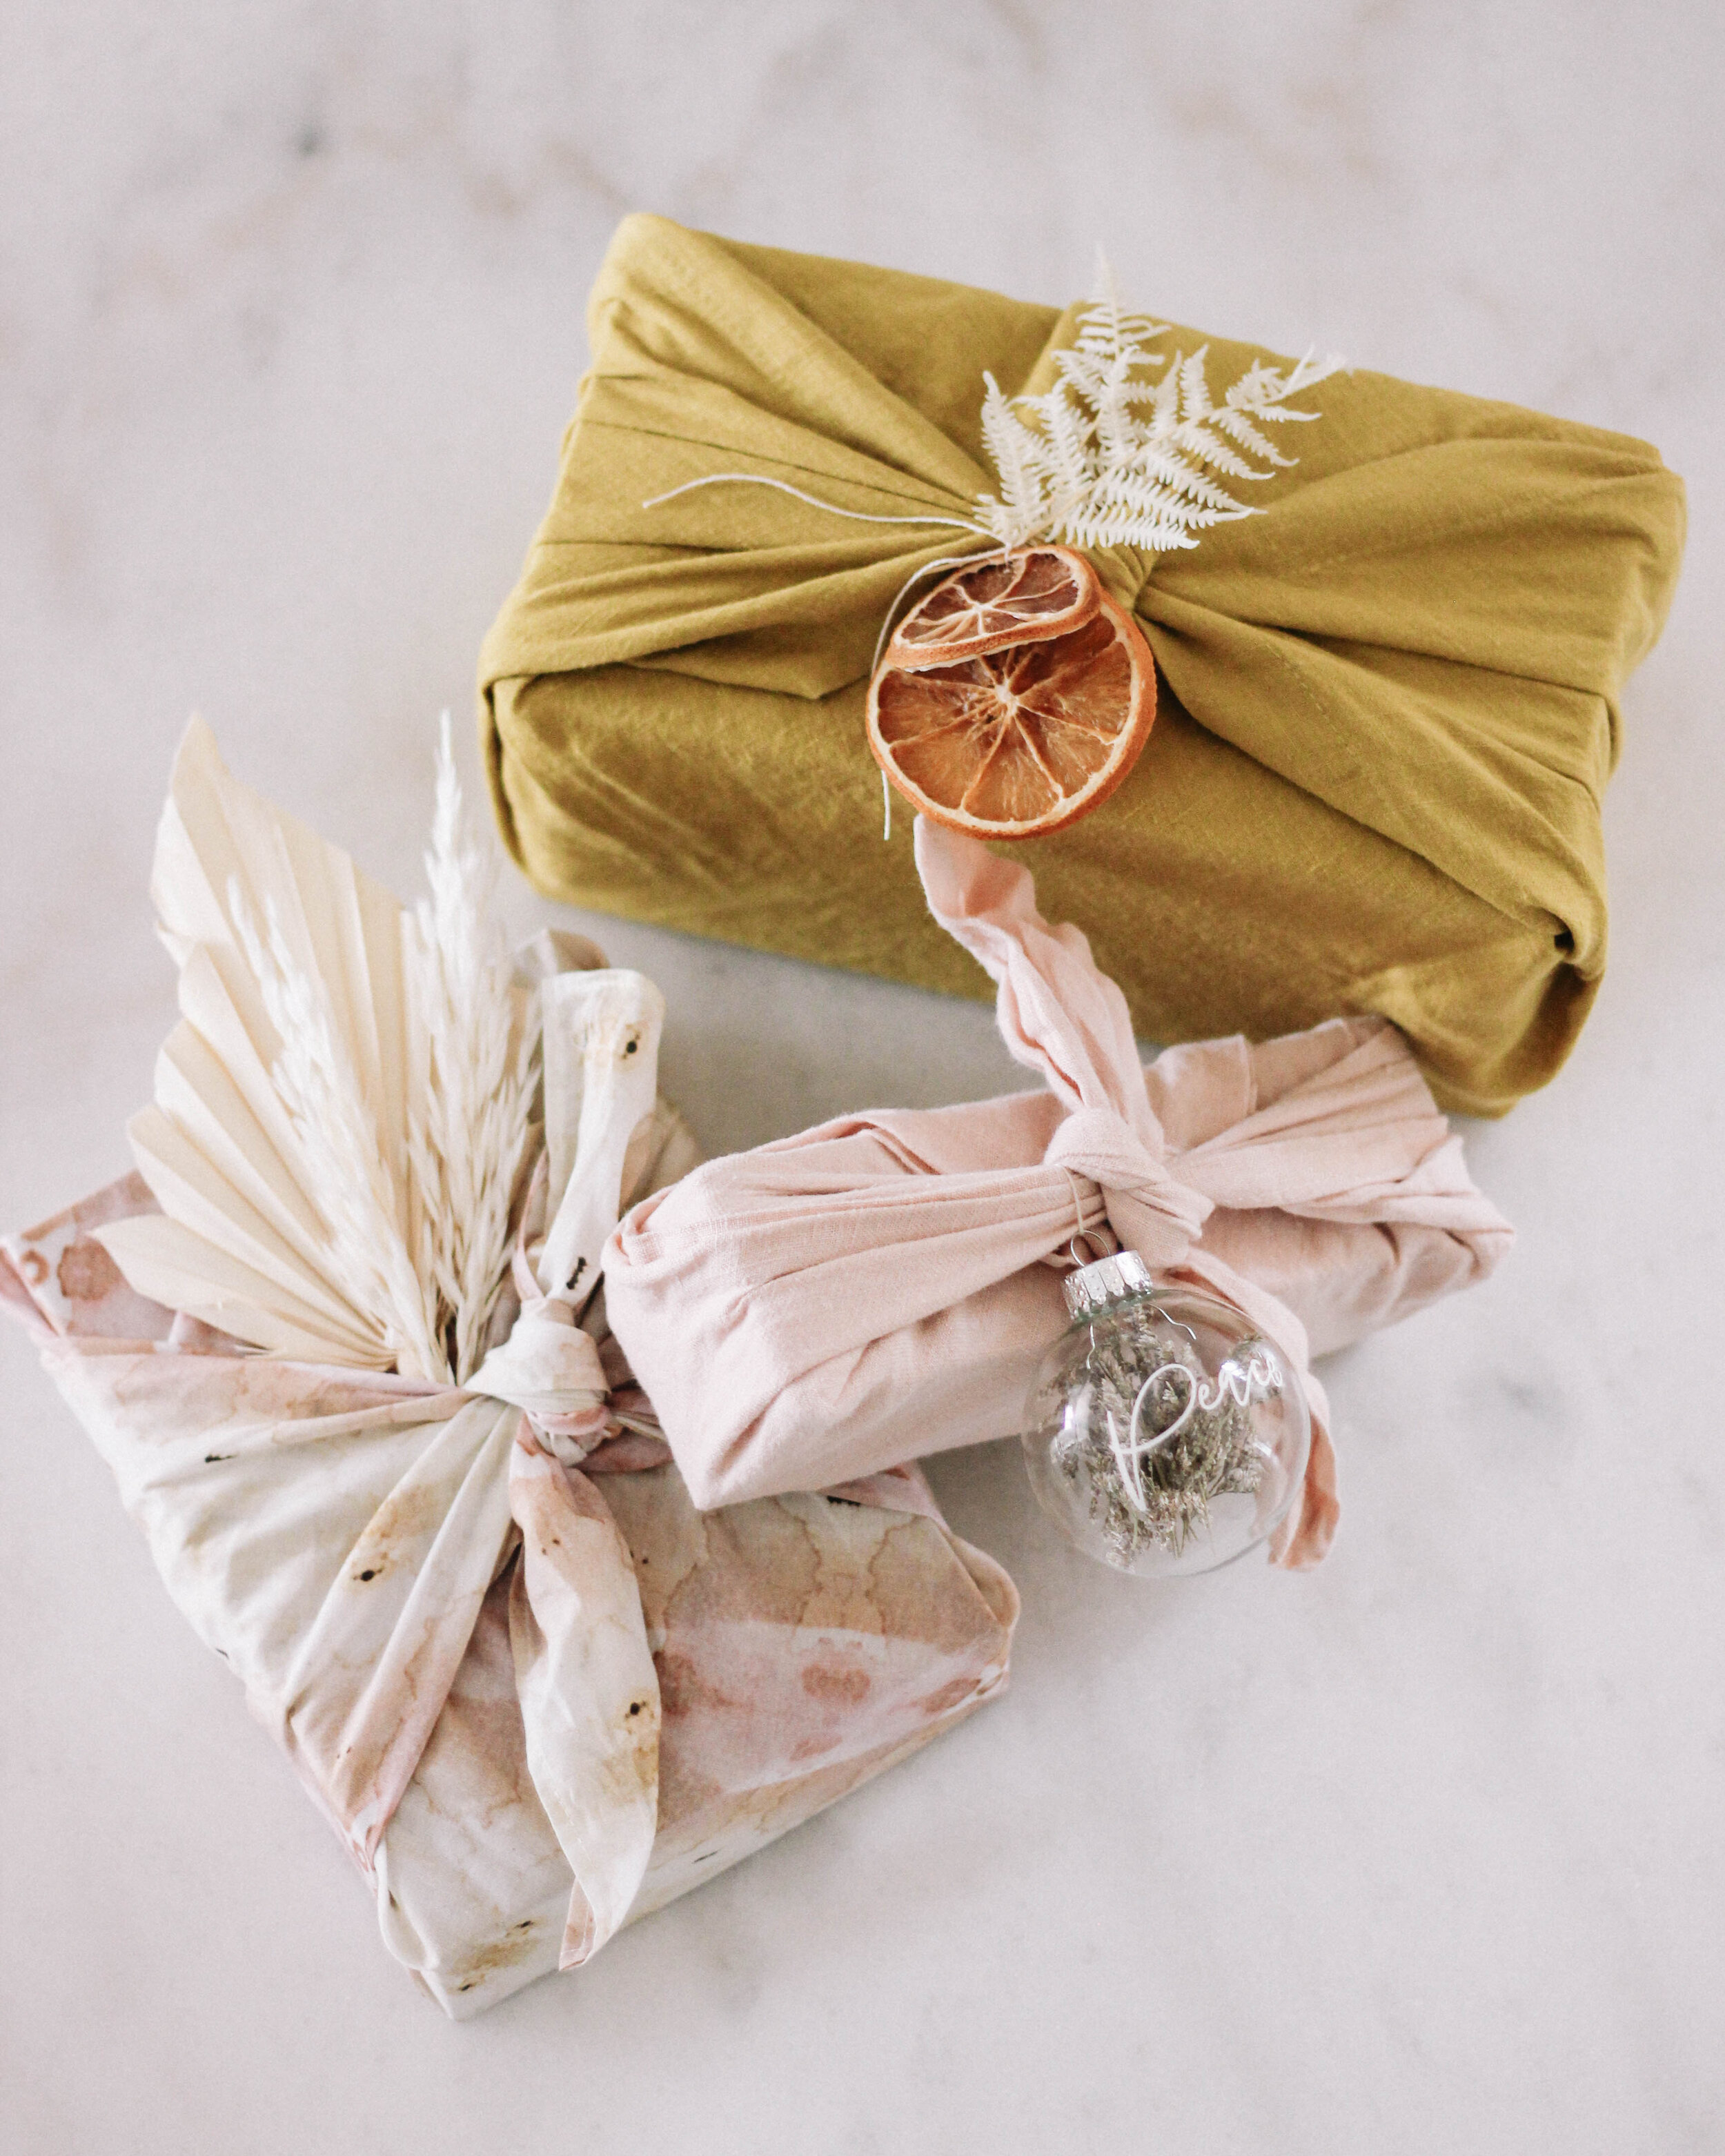 Bridal Shower Gifts and Wrapping Ideas